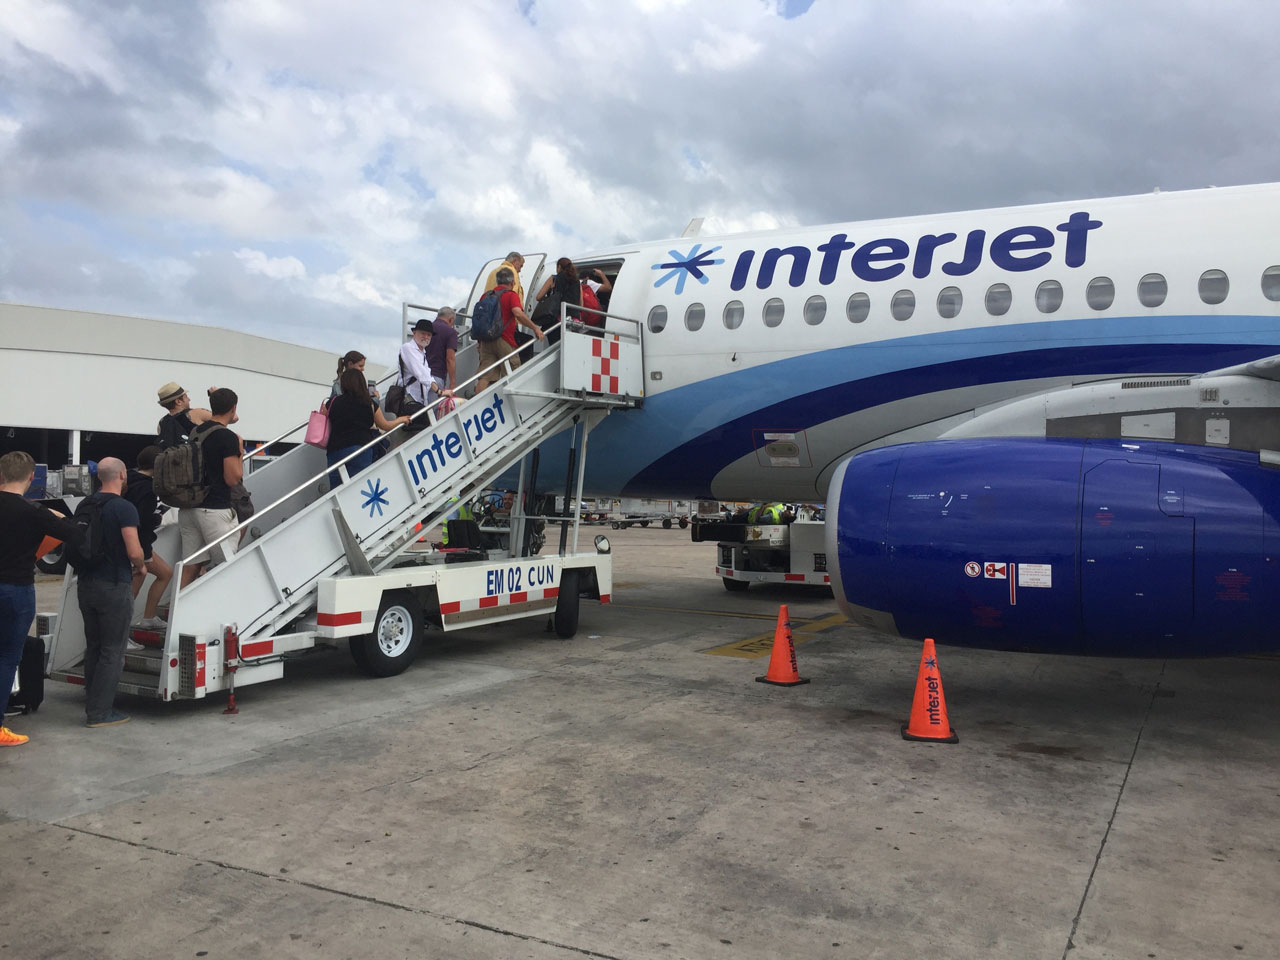 Cancun to La Habana: Thoughts on Interjet